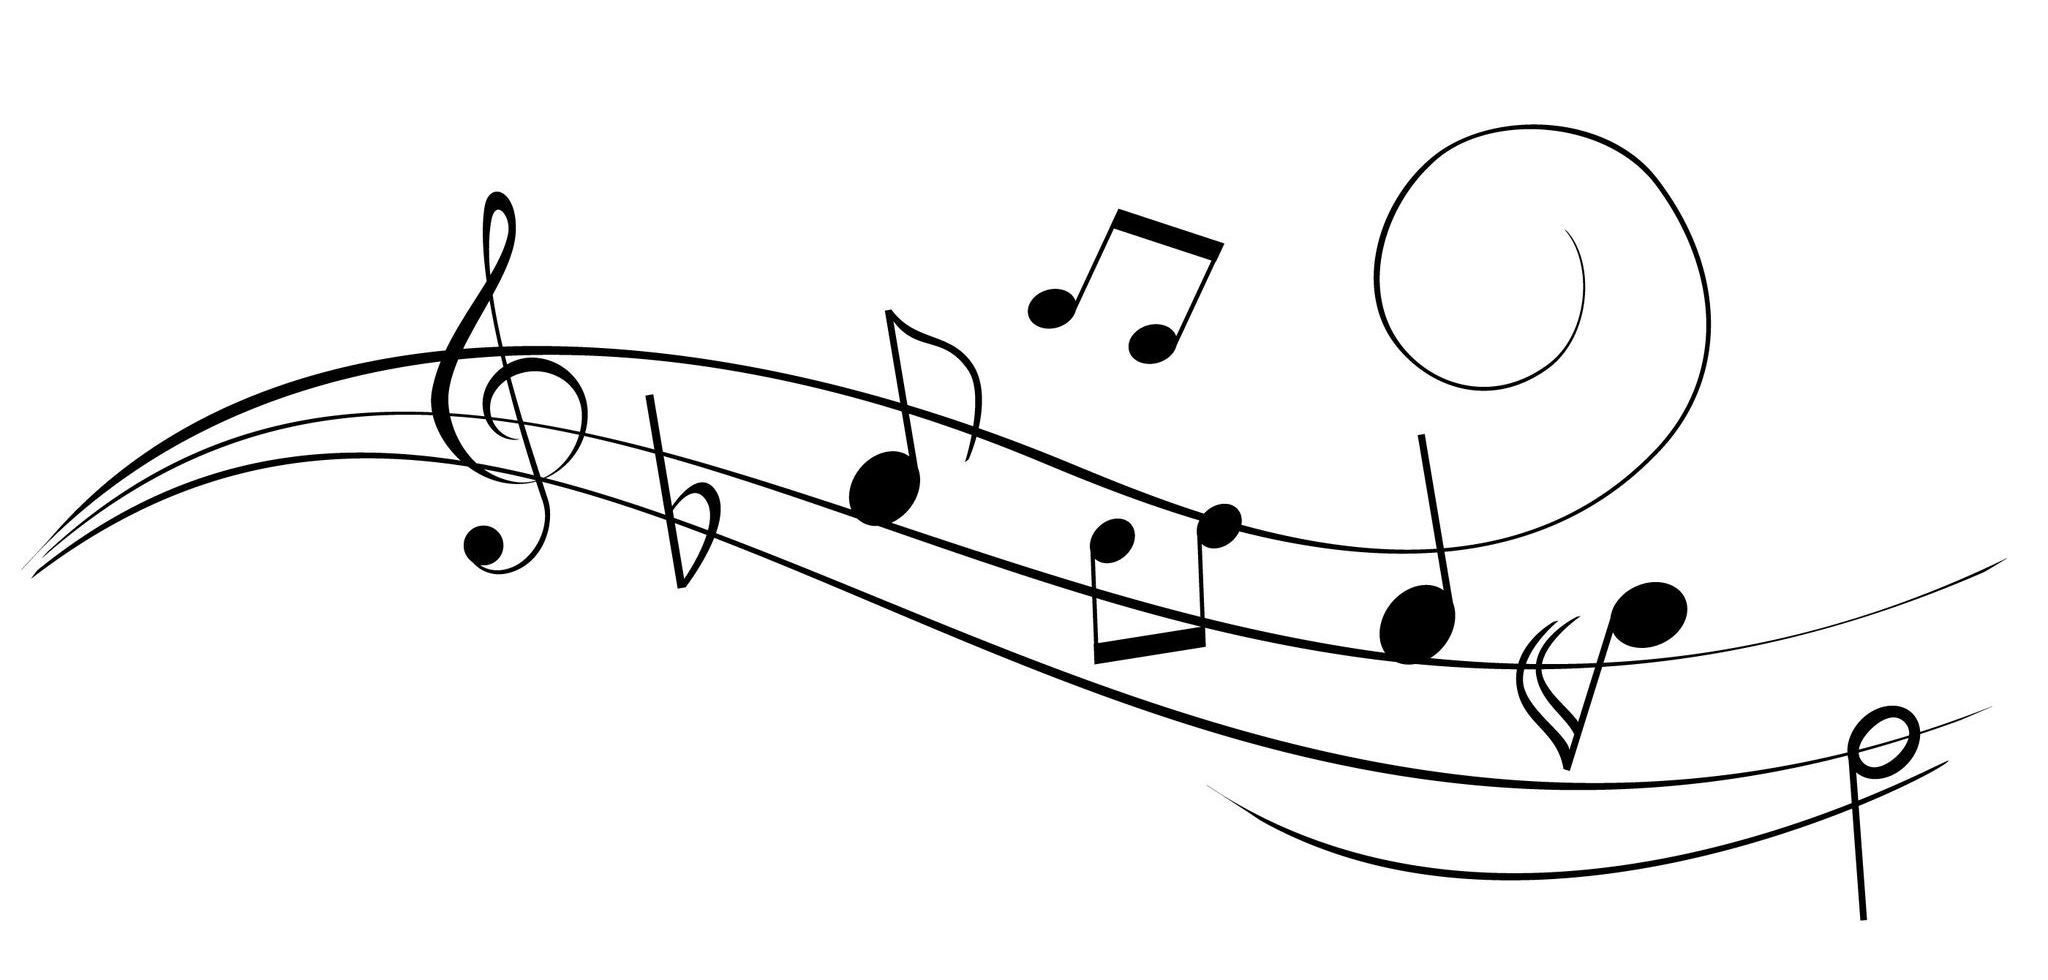 Images Of Music Notes - ClipArt Best